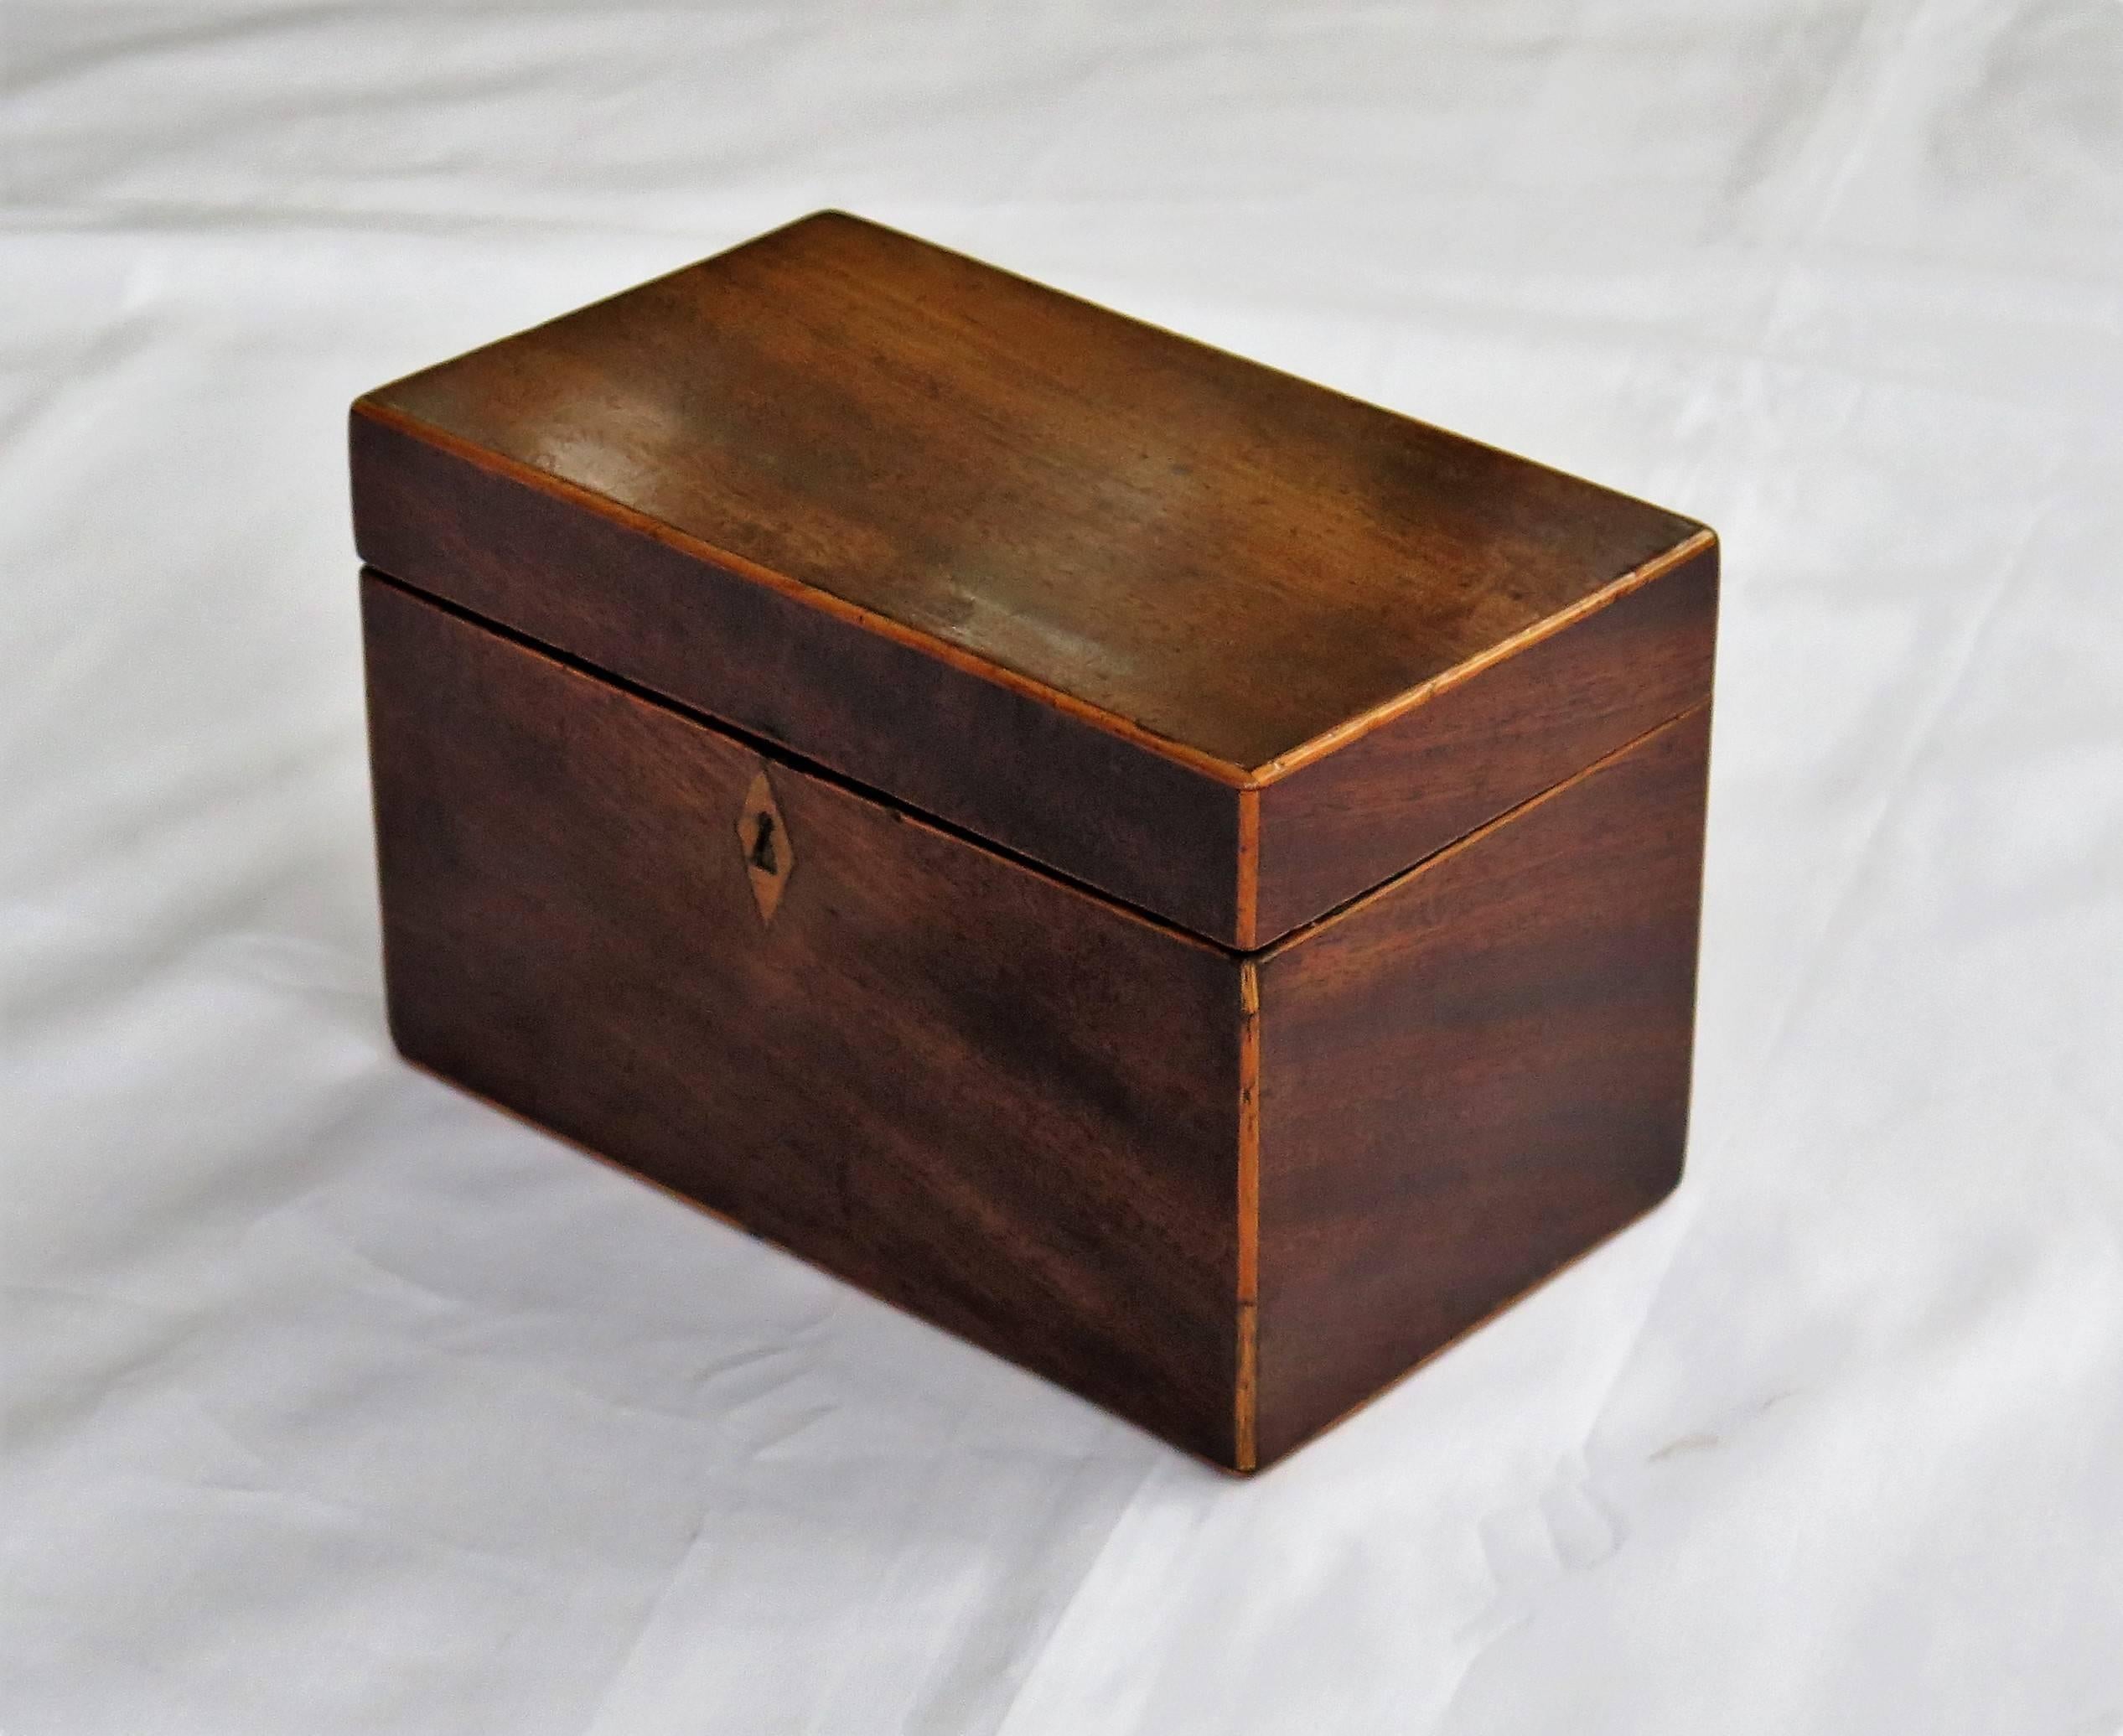 This is a very nice quality English Georgian Period Tea Caddy.

The Tea Caddy is handmade of a well figured mahogany, with boxwood stringing applied to all of its external edges. The caddy has a lovely color and patination due to use, polishing and